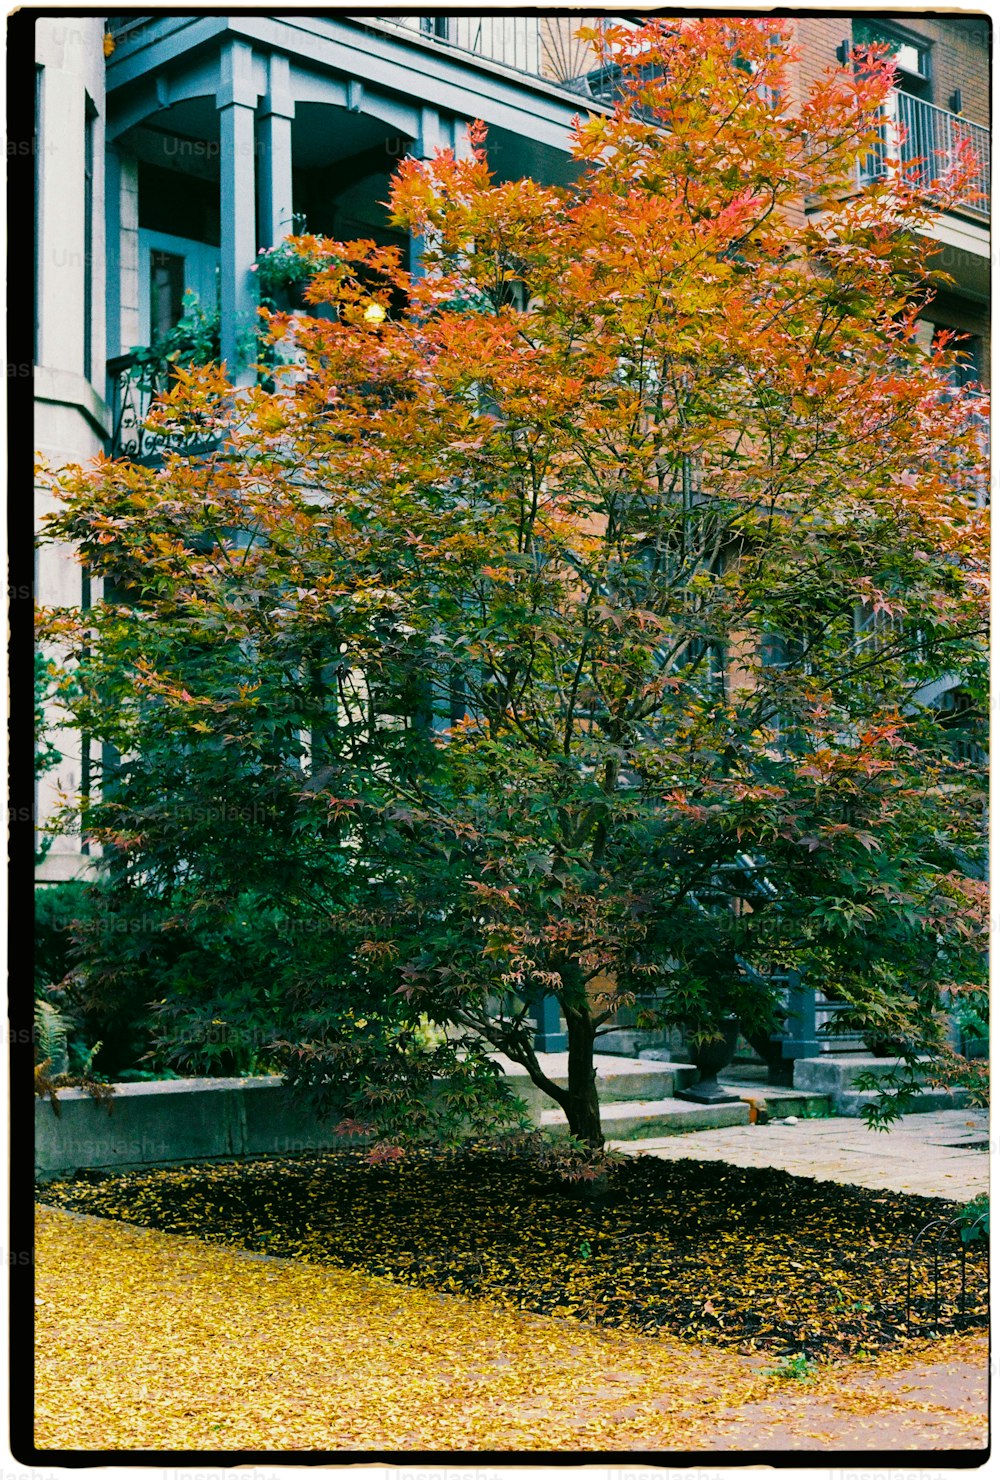 a tree with orange leaves in front of a building